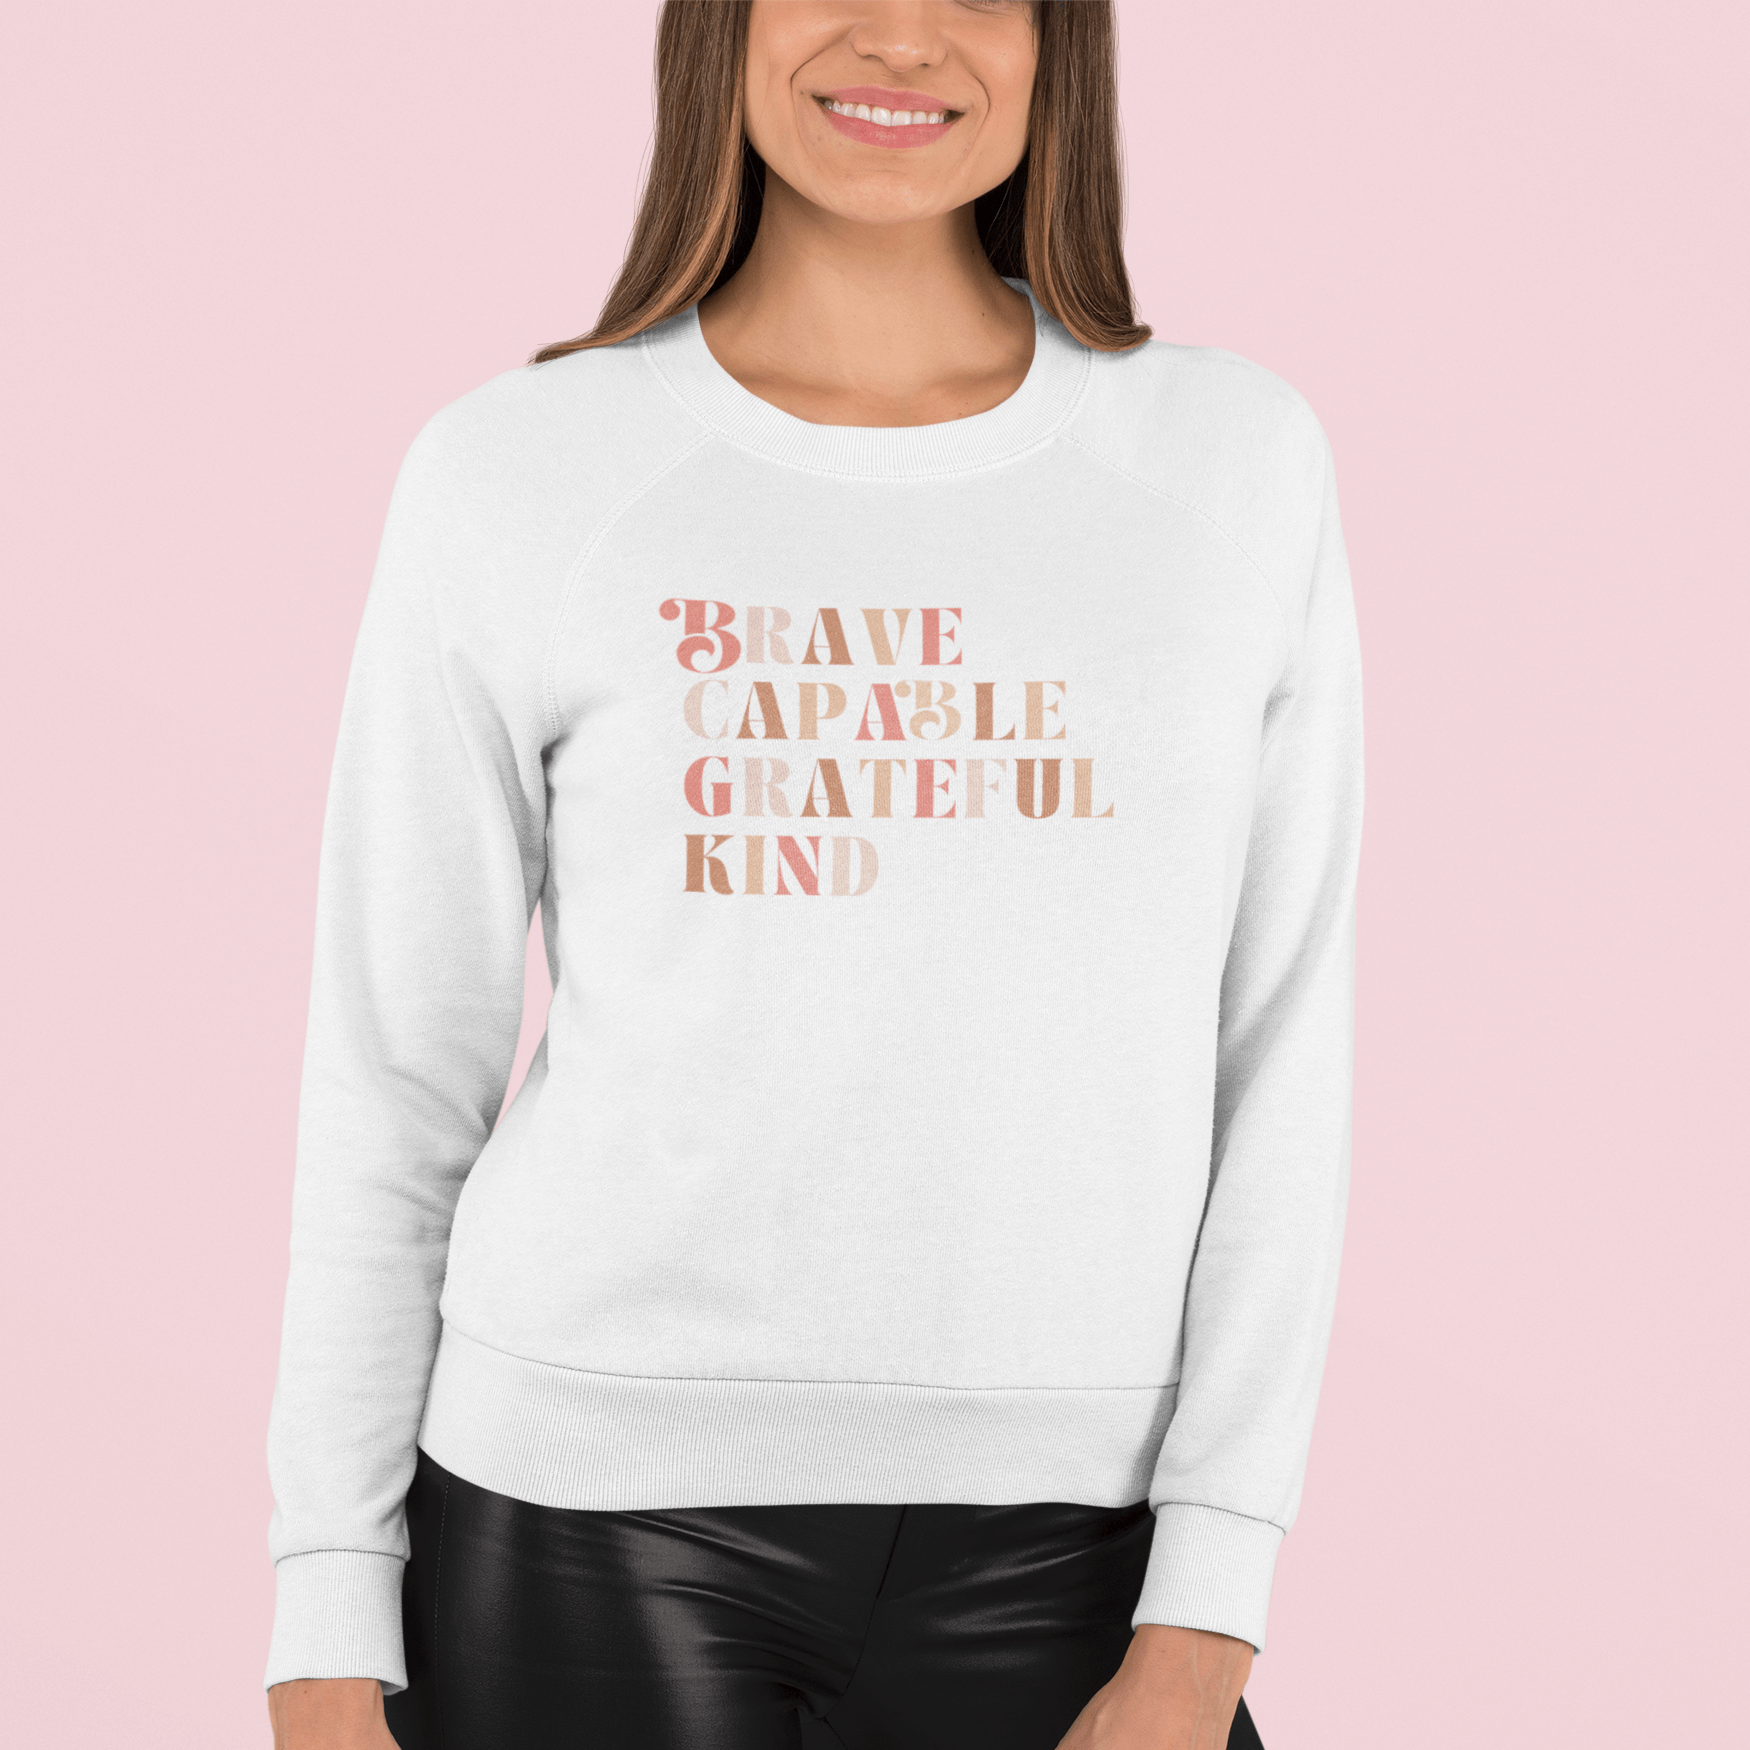 Brave, Capable, Grateful Kind Unisex Fit Crewneck Sweatshirt - The Kindness Cause Gifts for women that give back